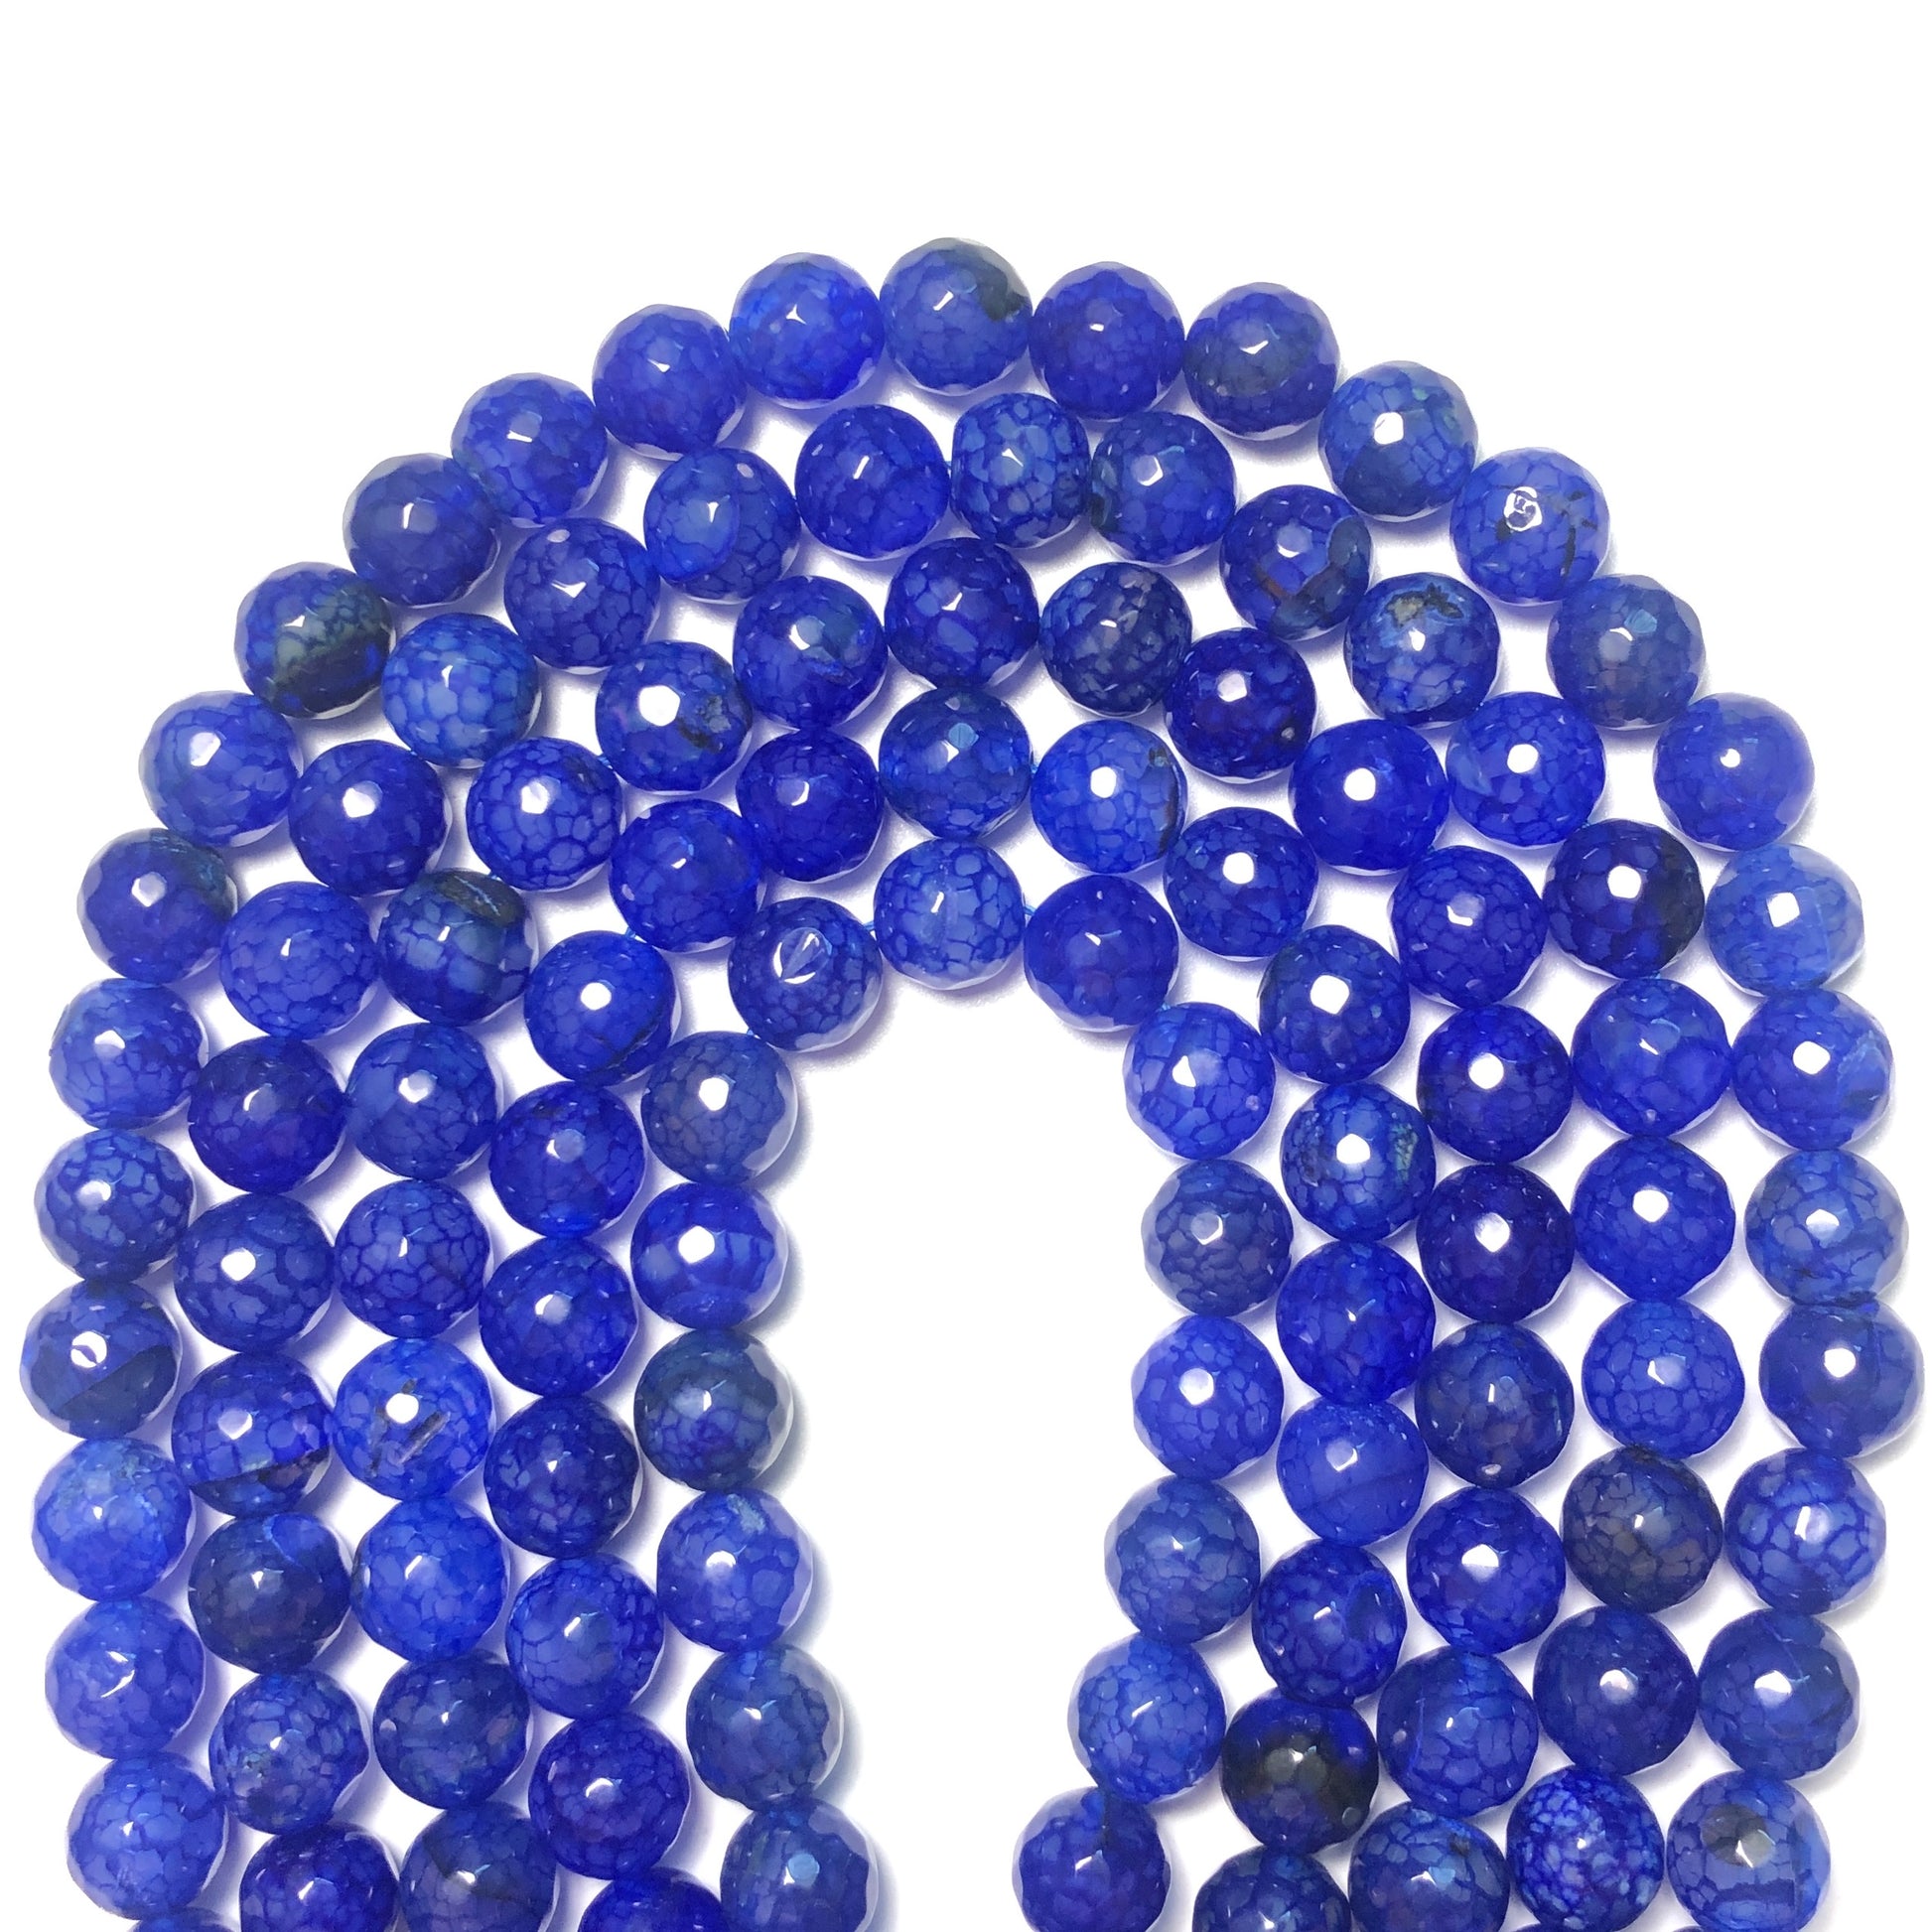 2 Strands/lot 10mm Blue Faceted Dragon Agate Stone Beads Stone Beads Faceted Agate Beads Charms Beads Beyond